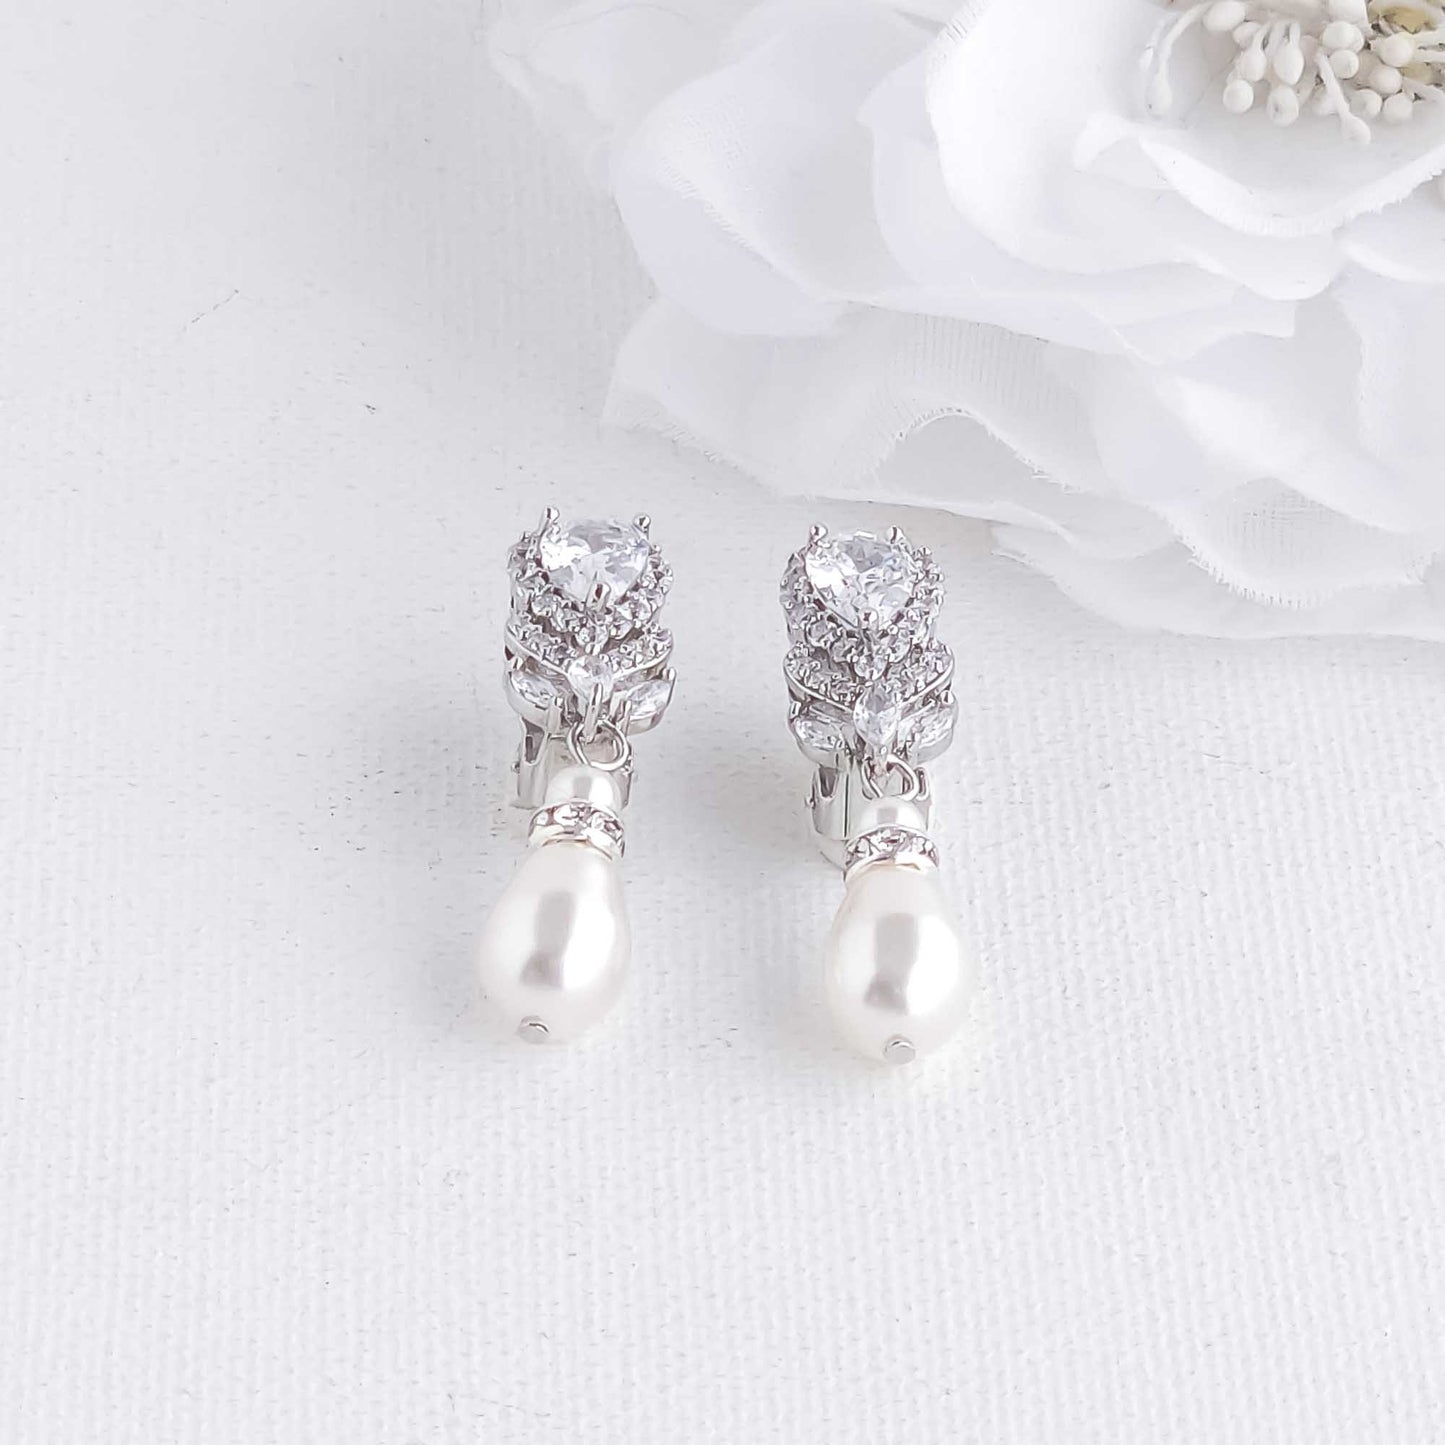 Vintage Clip On Earrings with Pearl Drops-Lucia